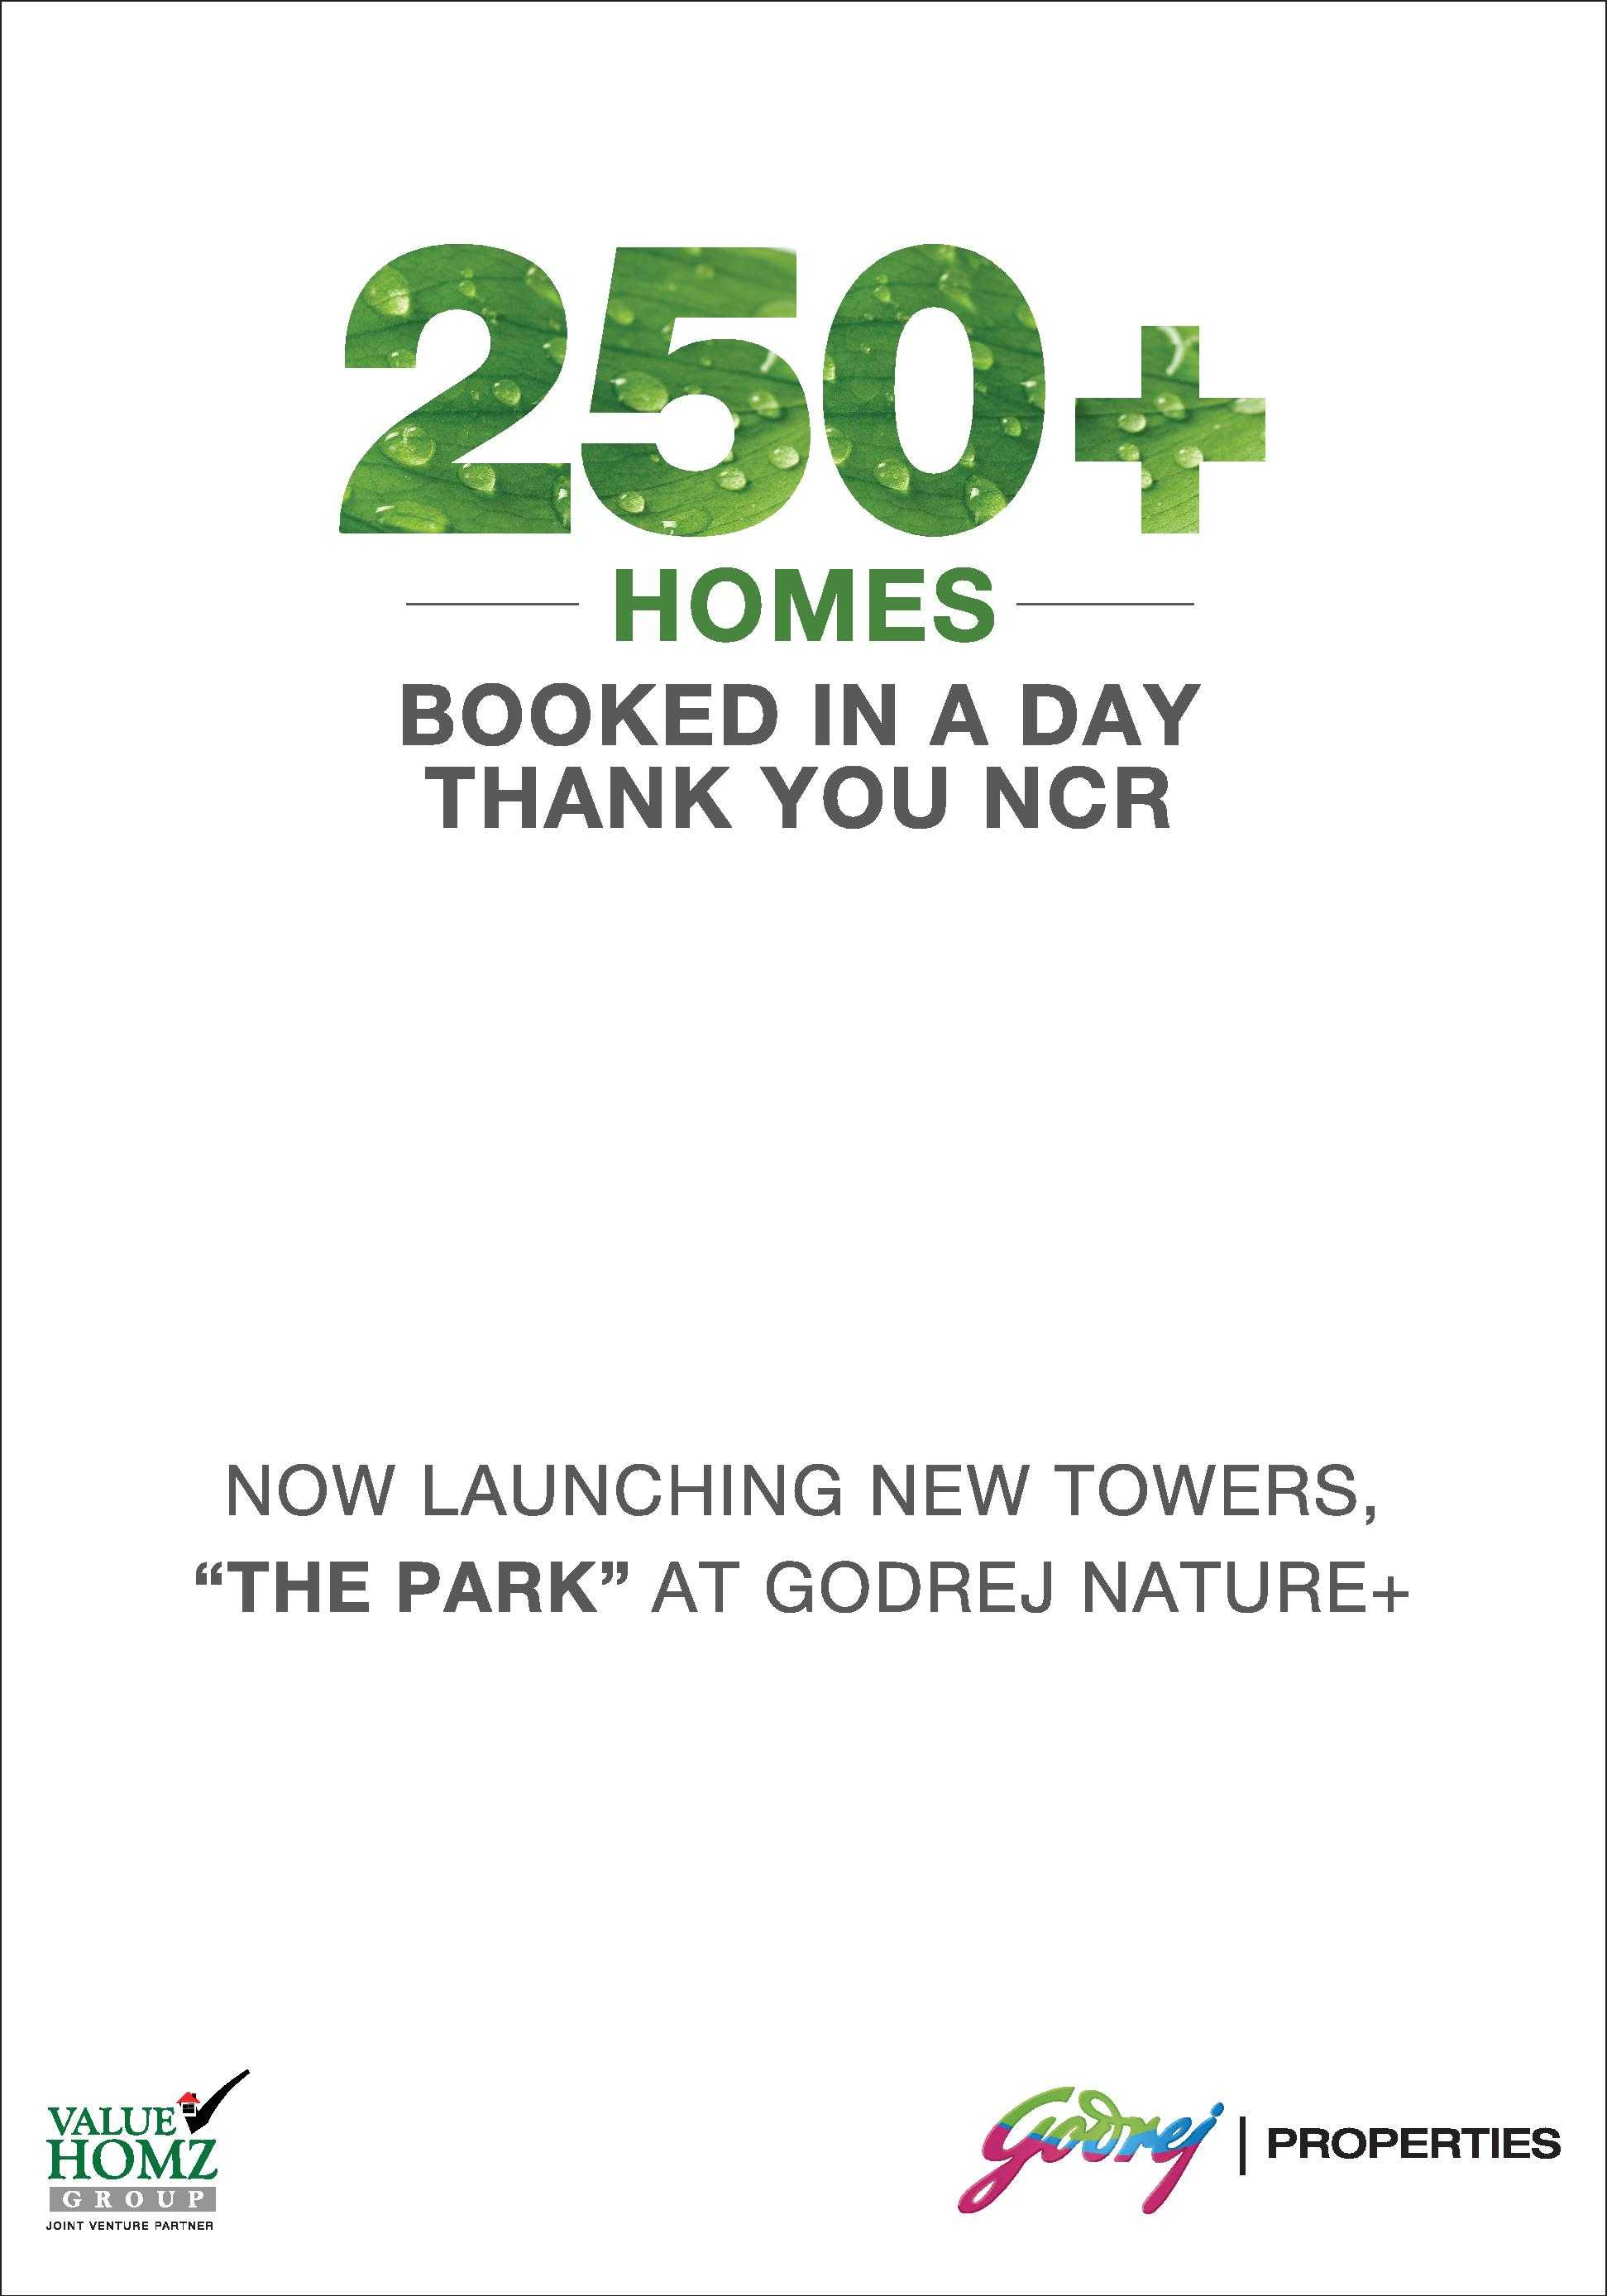 Launching new towers The Park at Godrej Nature Plus in Sohna